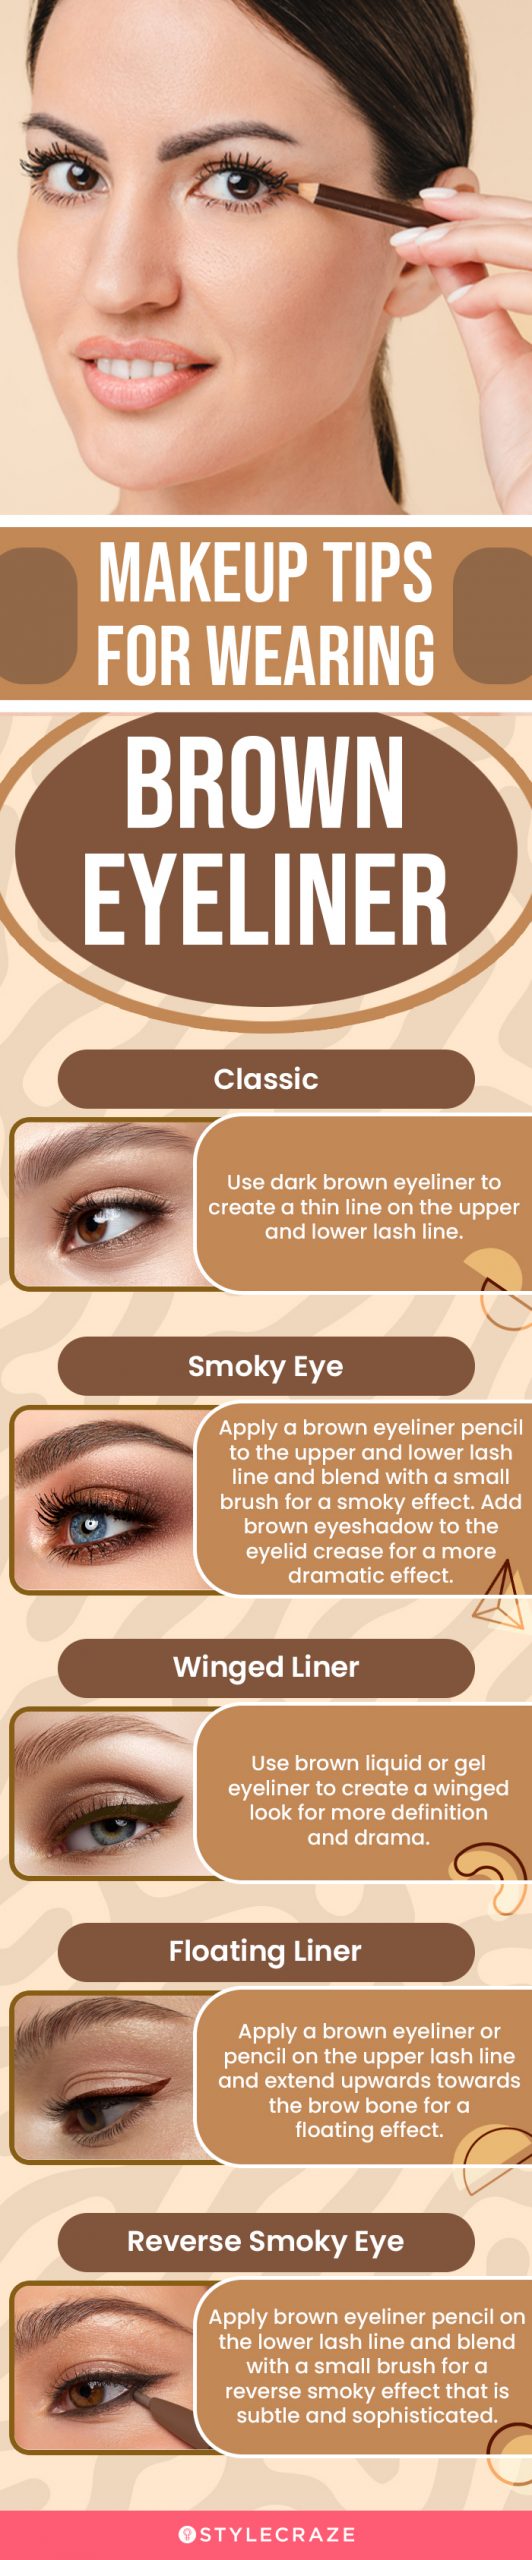 Makeup Tips For Wearing Brown Eyeliner (infographic)